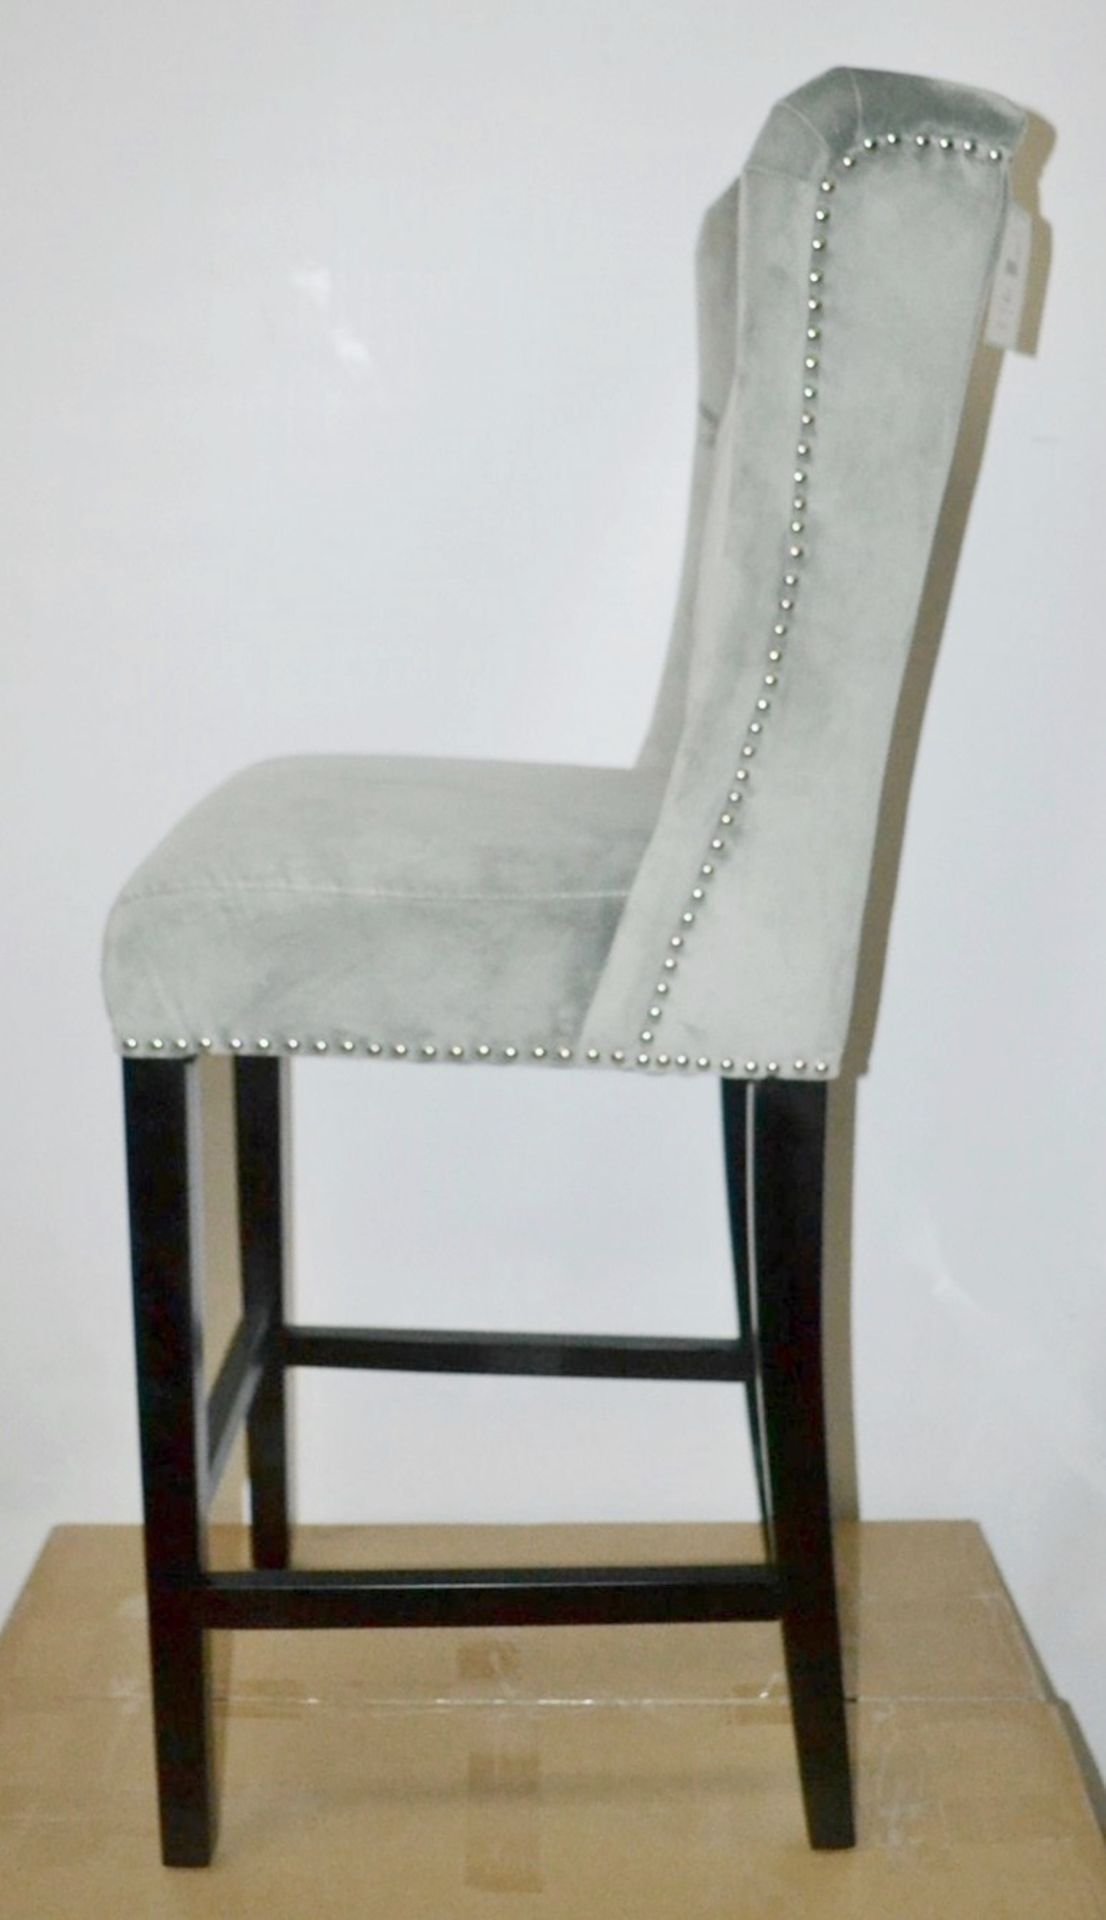 3 x HOUSE OF SPARKLES Luxury Wing Back Bar Stools In A Silver Velvet With BLACK Legs - Image 4 of 8